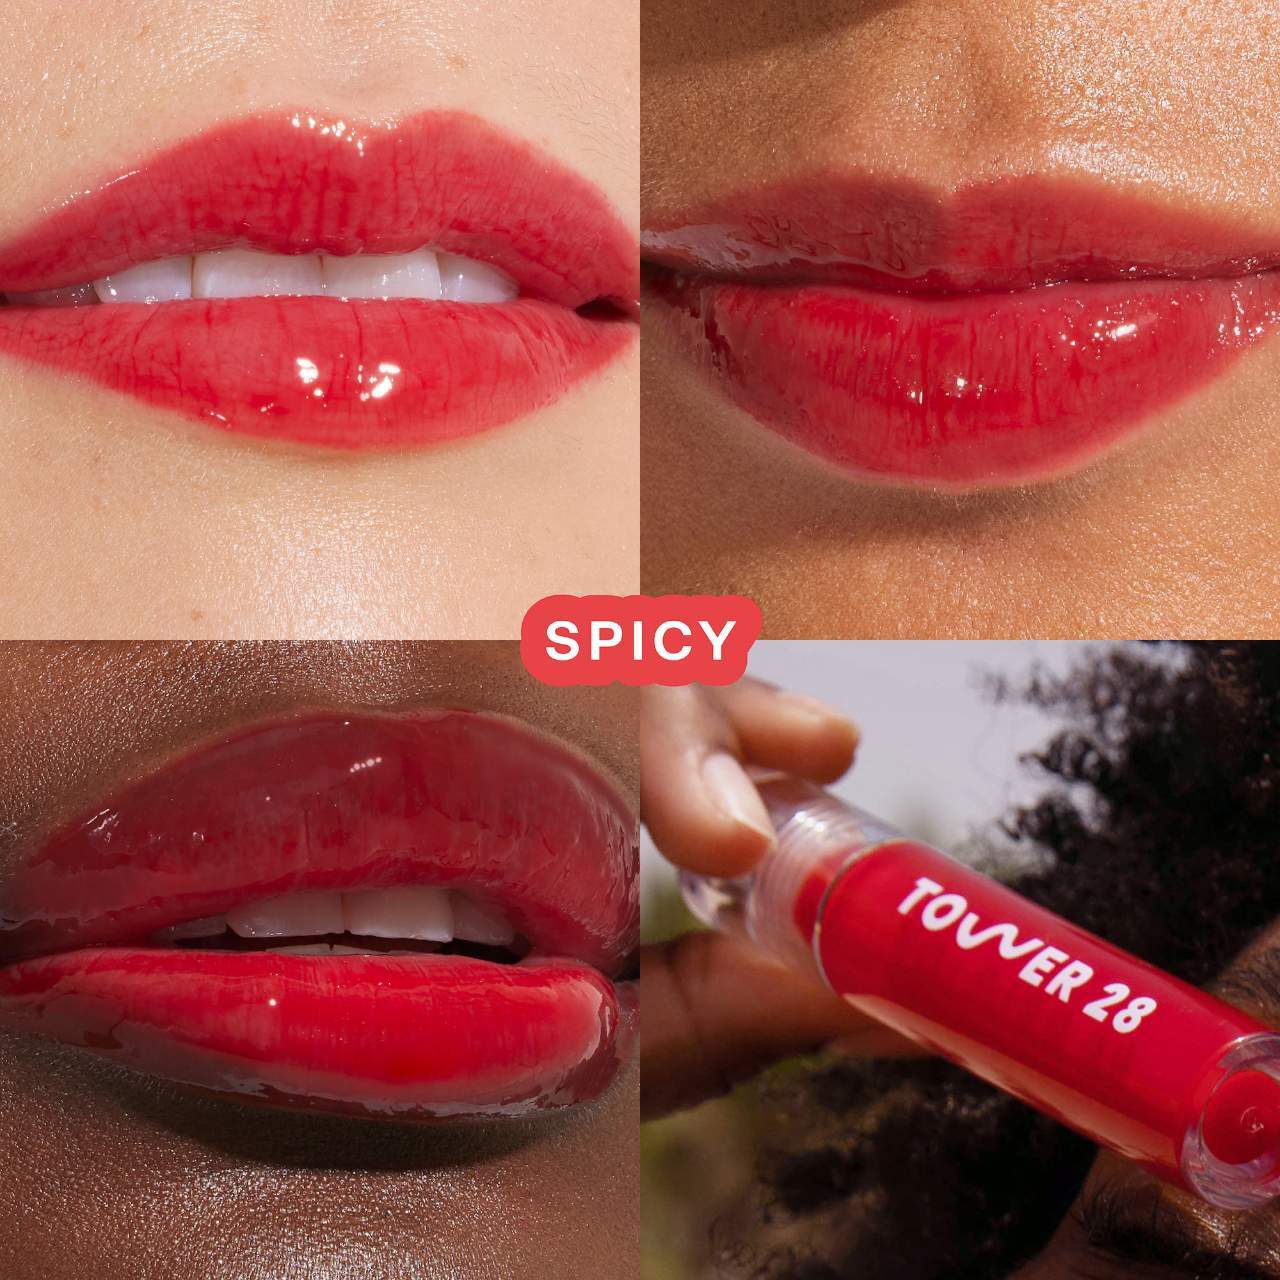 The Spicy red lipstick